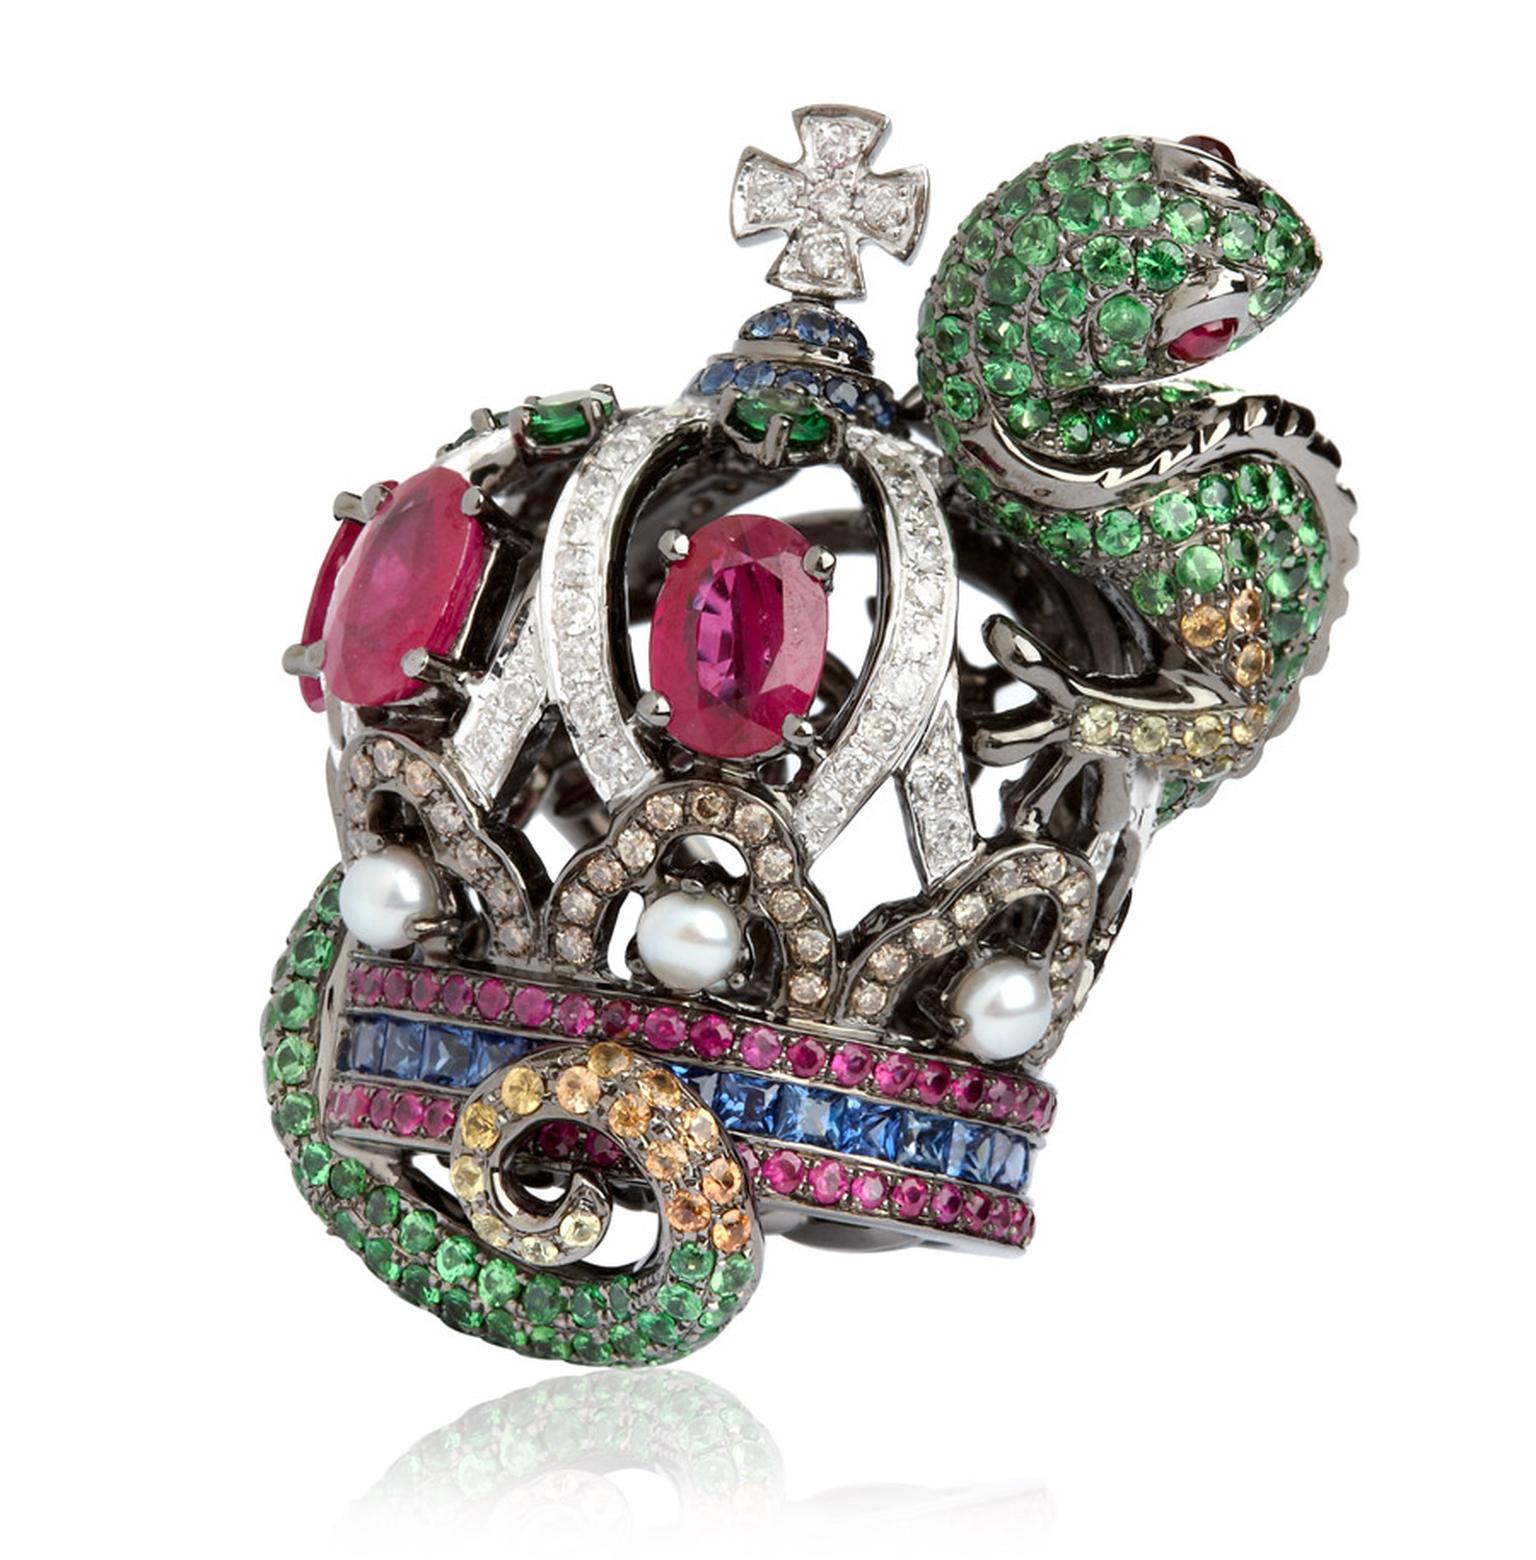 Wendy-Yue-Fantasie-Jubilee-18ct-white-gold diamond sapphire garnet-and-ruby-Lizard-ring-by-Wendy-Yue-for-Annoushka_02a.jpg